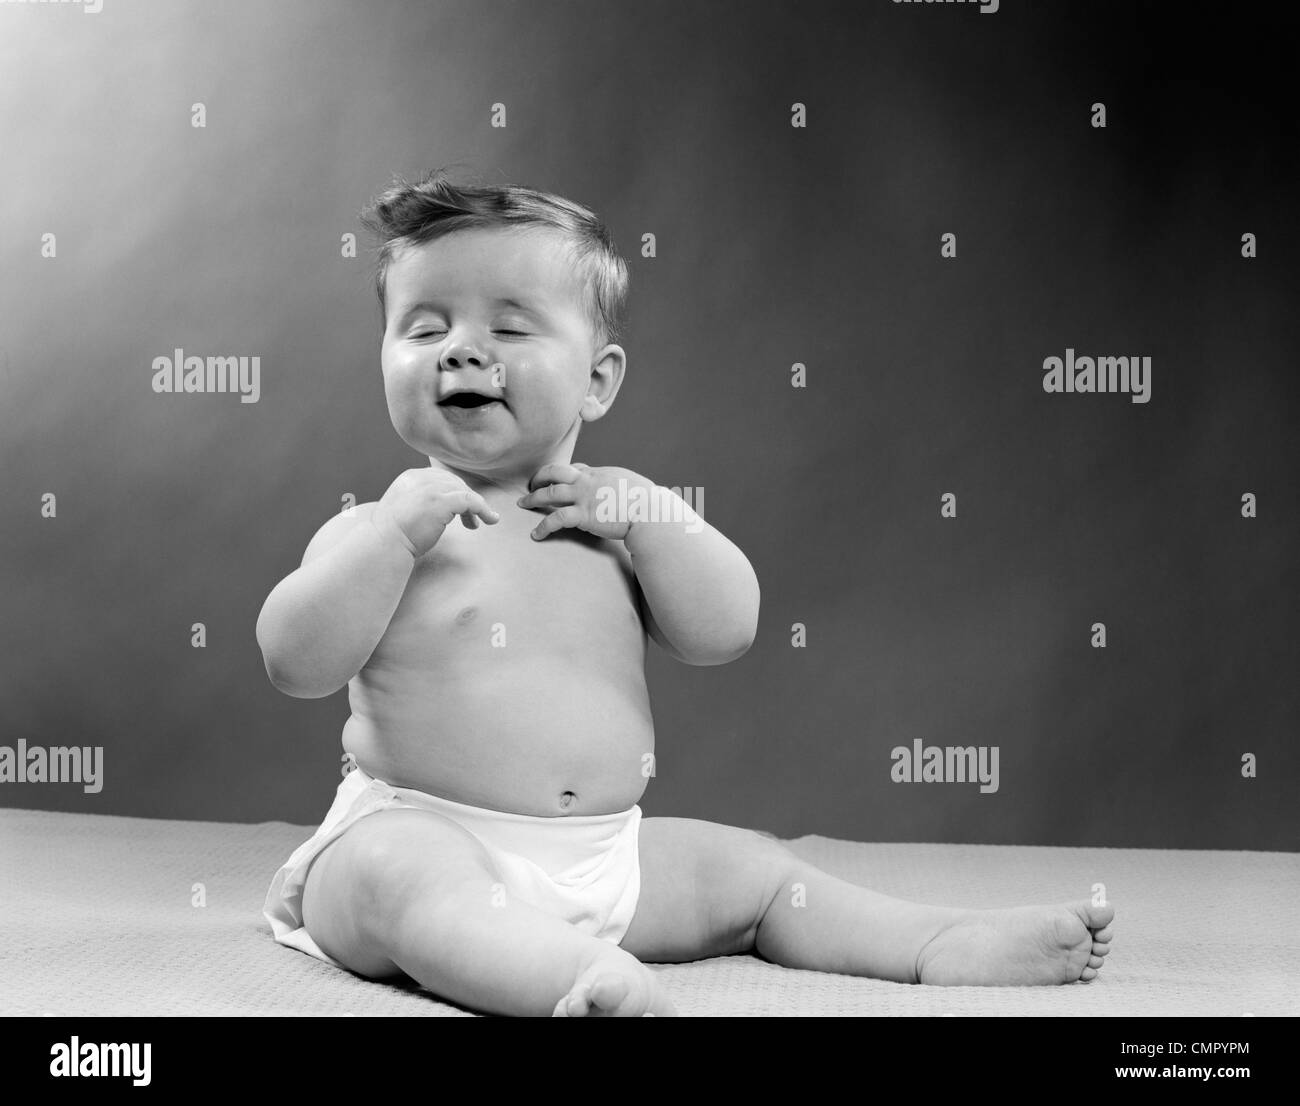 1950s BABY WEARING DIAPER SEATED WITH EYES CLOSED MOUTH OPEN & HANDS TOUCHING NECK Stock Photo